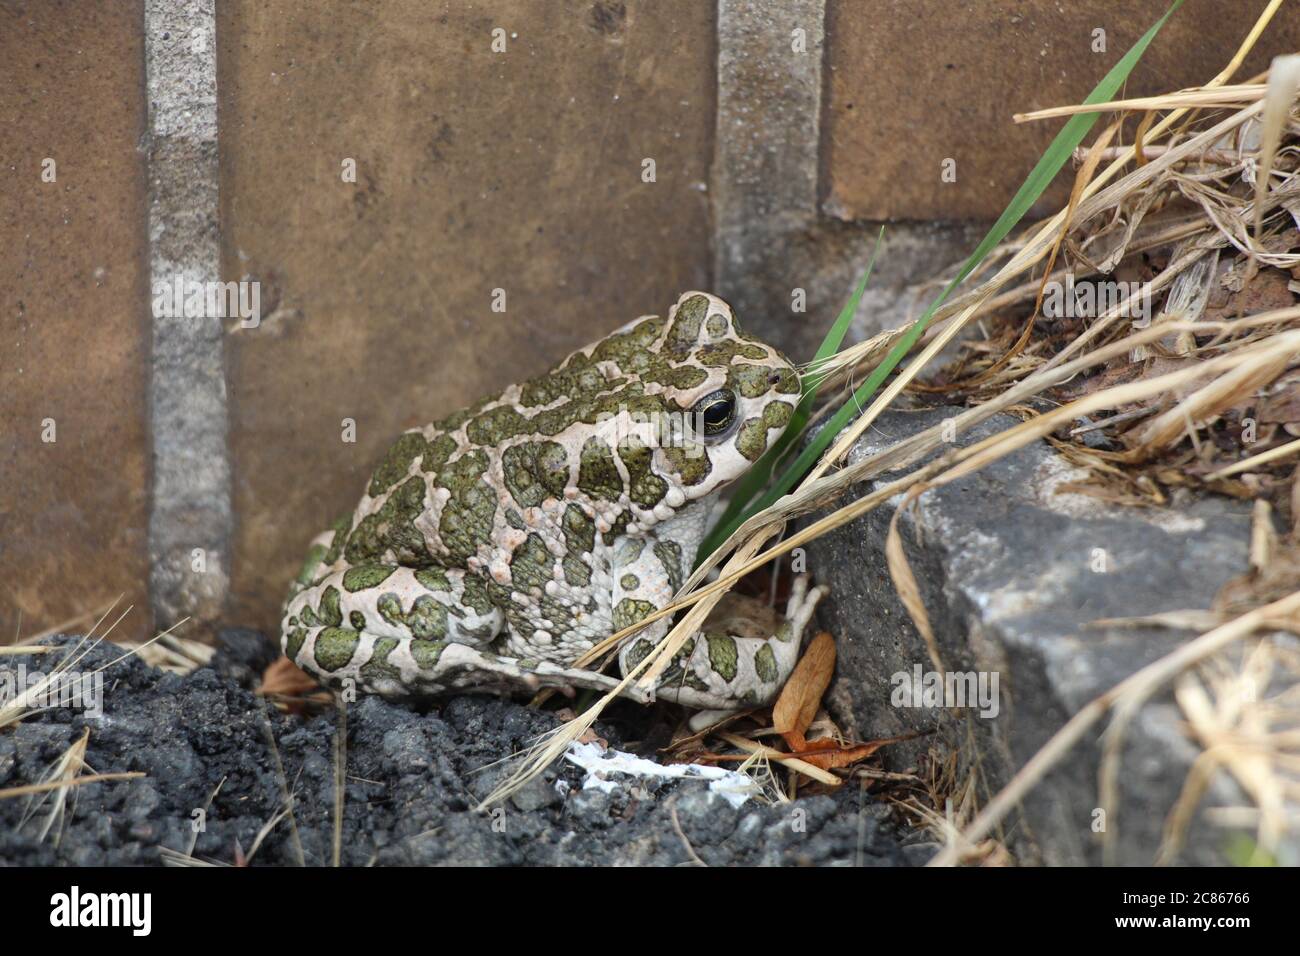 A green toad next to the steps Stock Photo